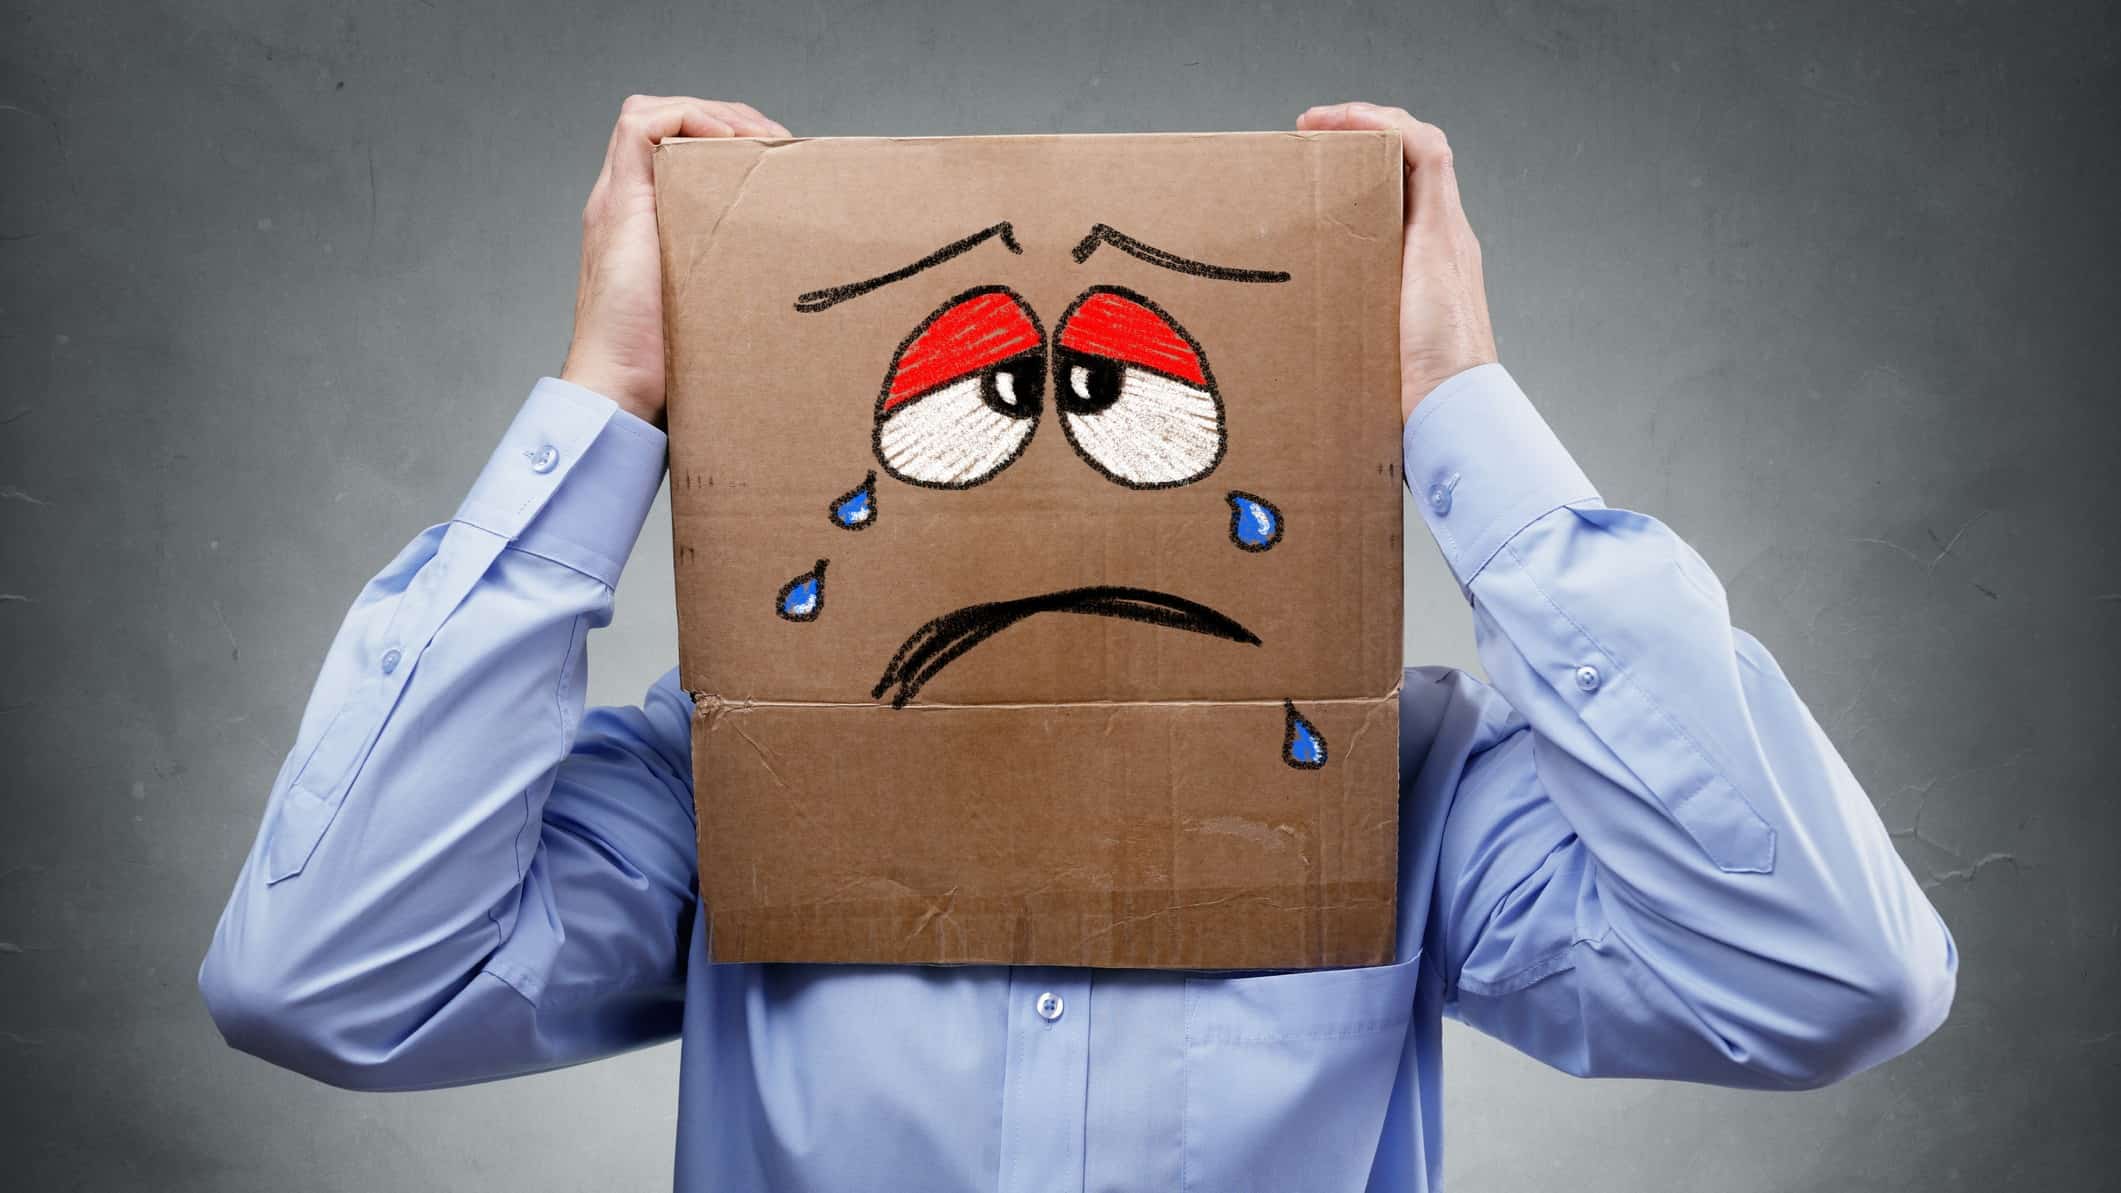 falling asx share price represented by business man wearing box on his head with a sad, crying face on it